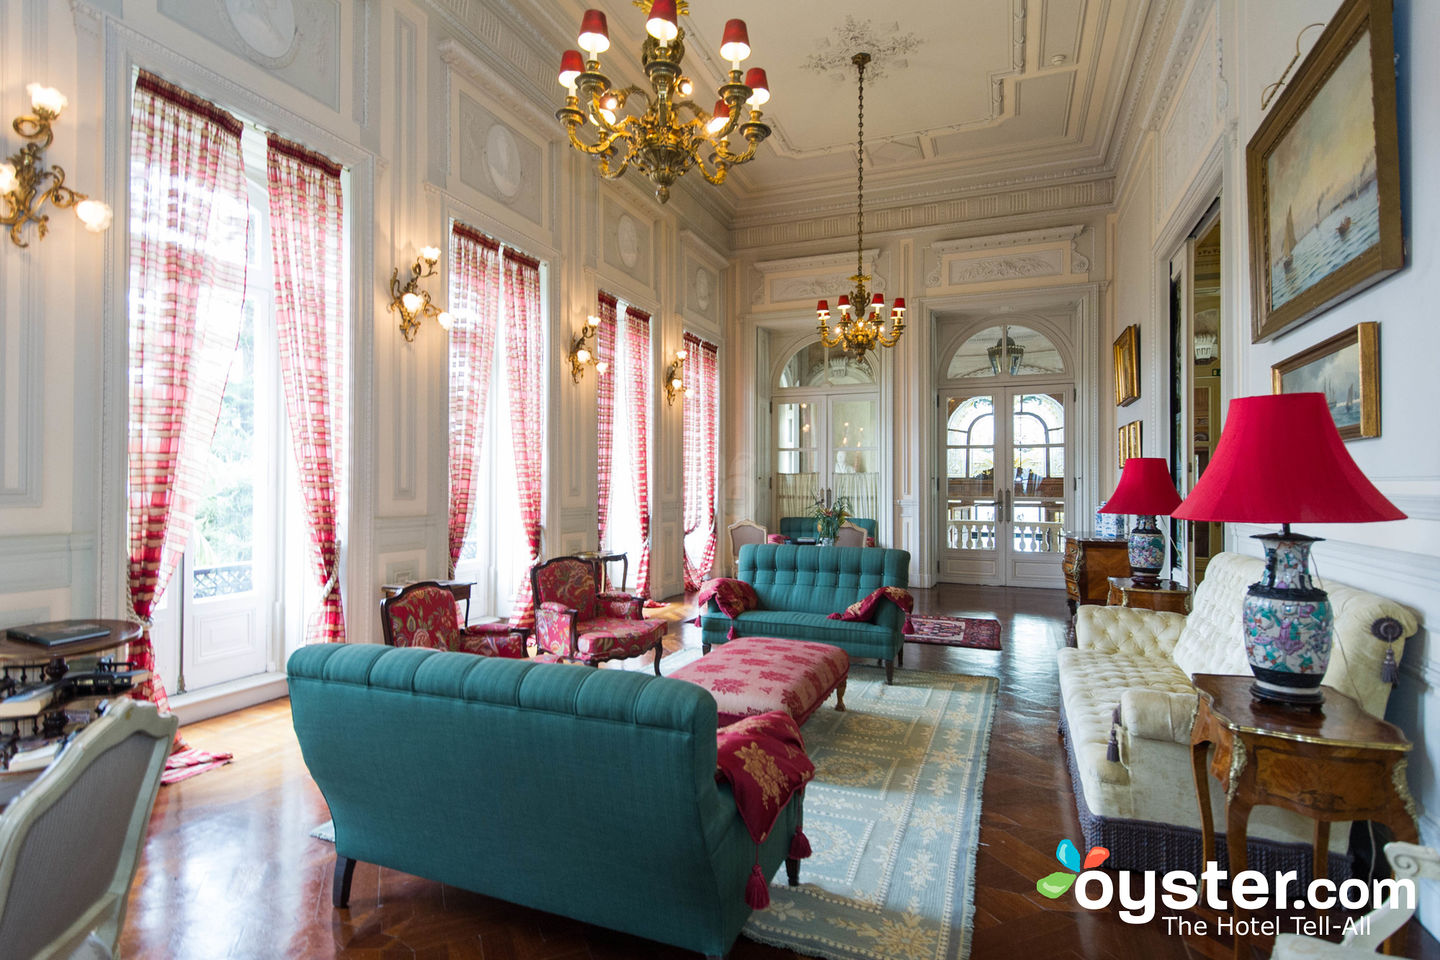 Pestana Palace Lisboa Review: What To REALLY Expect If You Stay